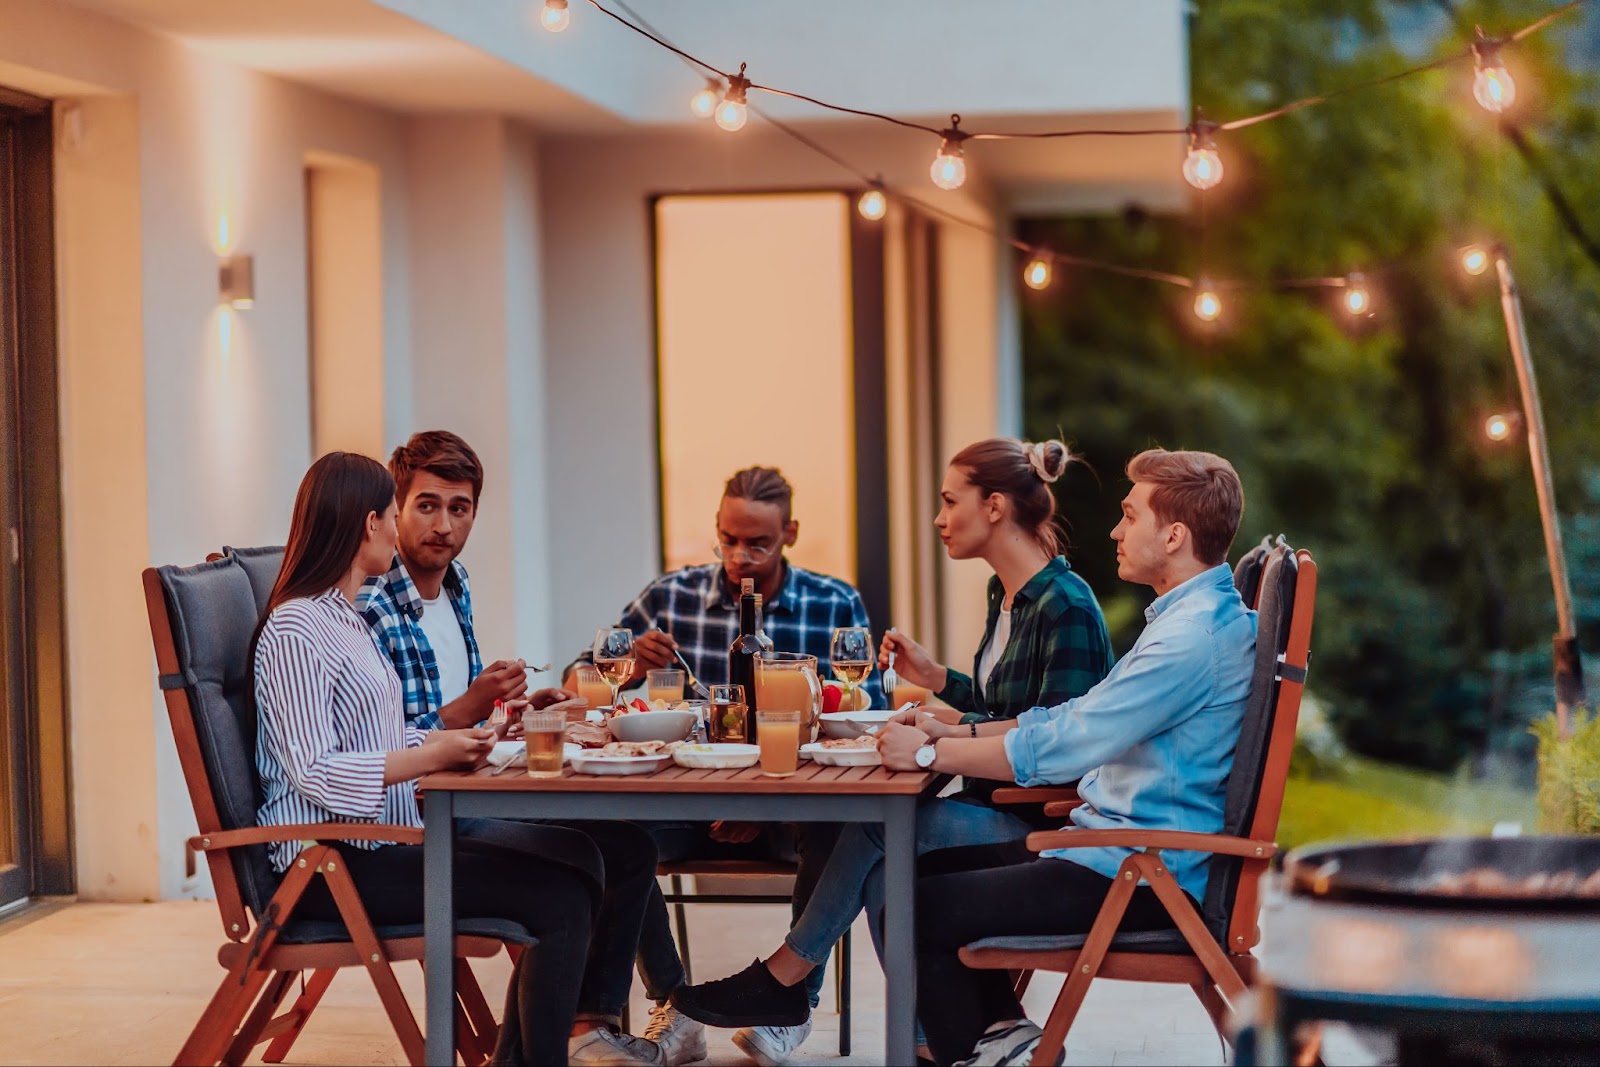 A group of friends sitting around a table at a backyard barbecue.